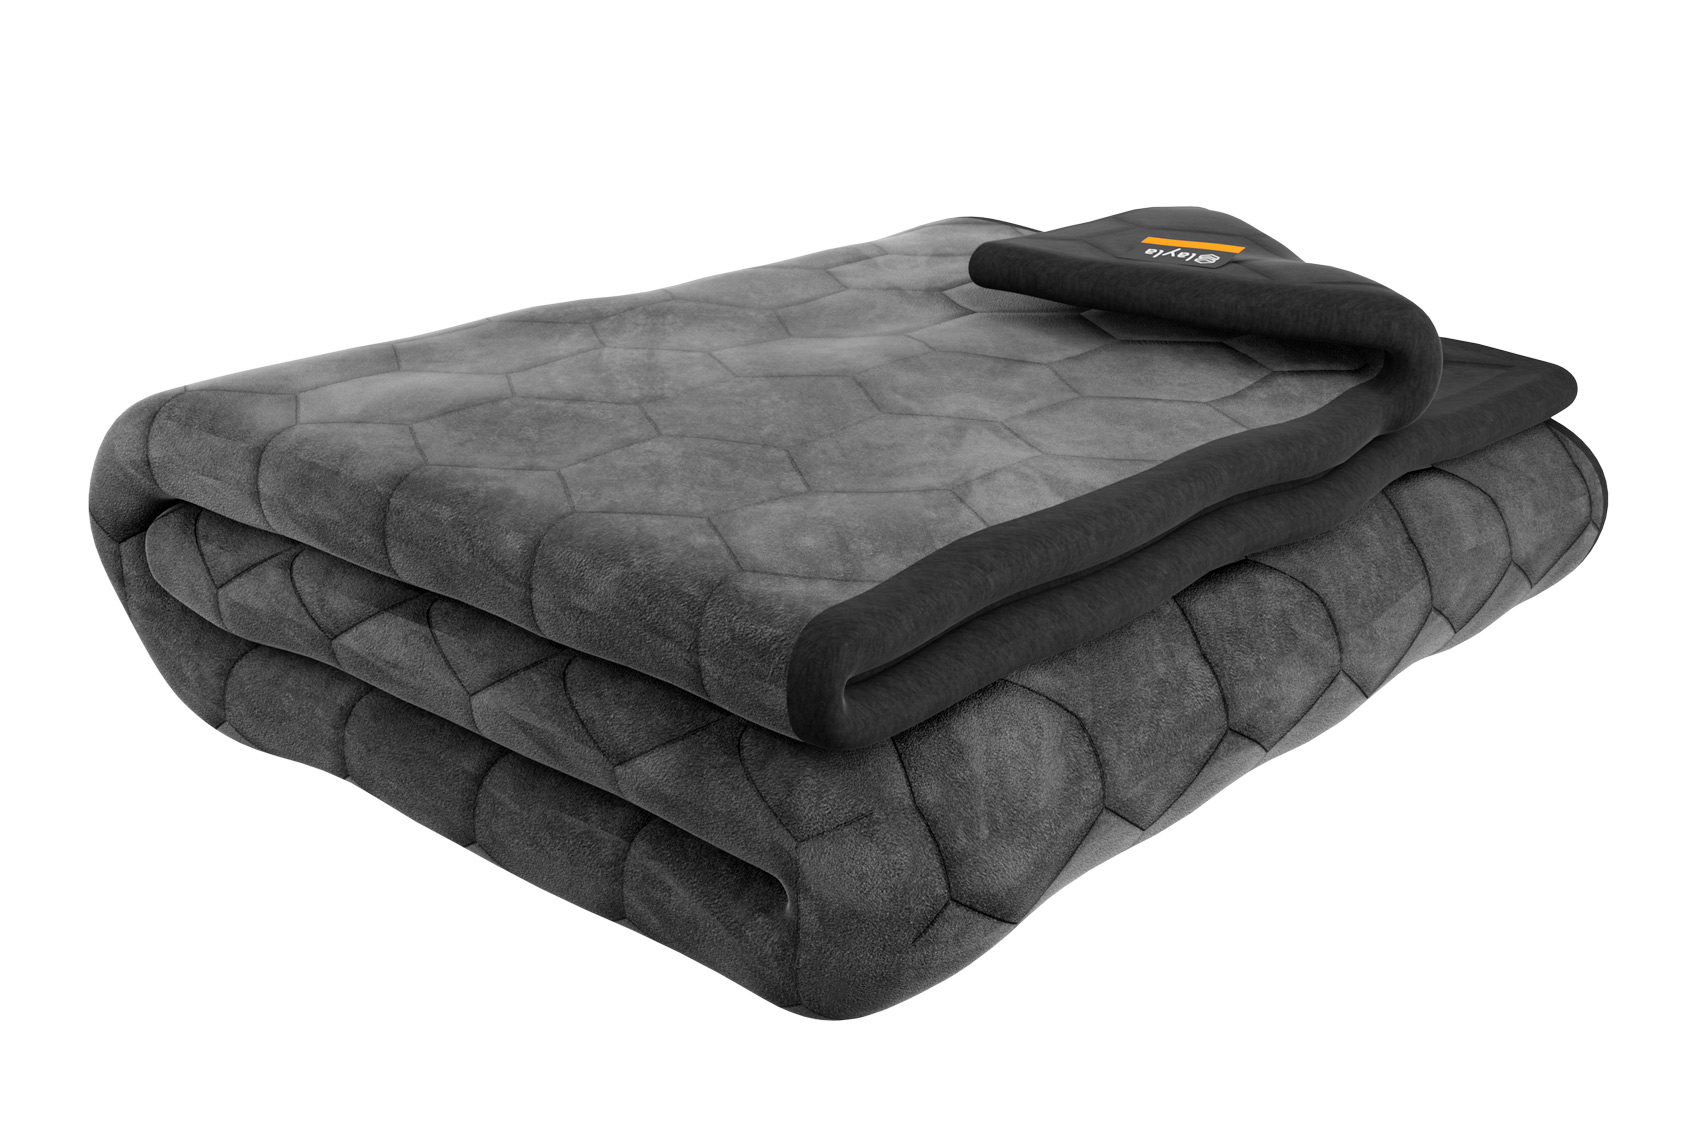 Weighted Blanket: Apply Pressure to Improve Sleep & Reduce Stress